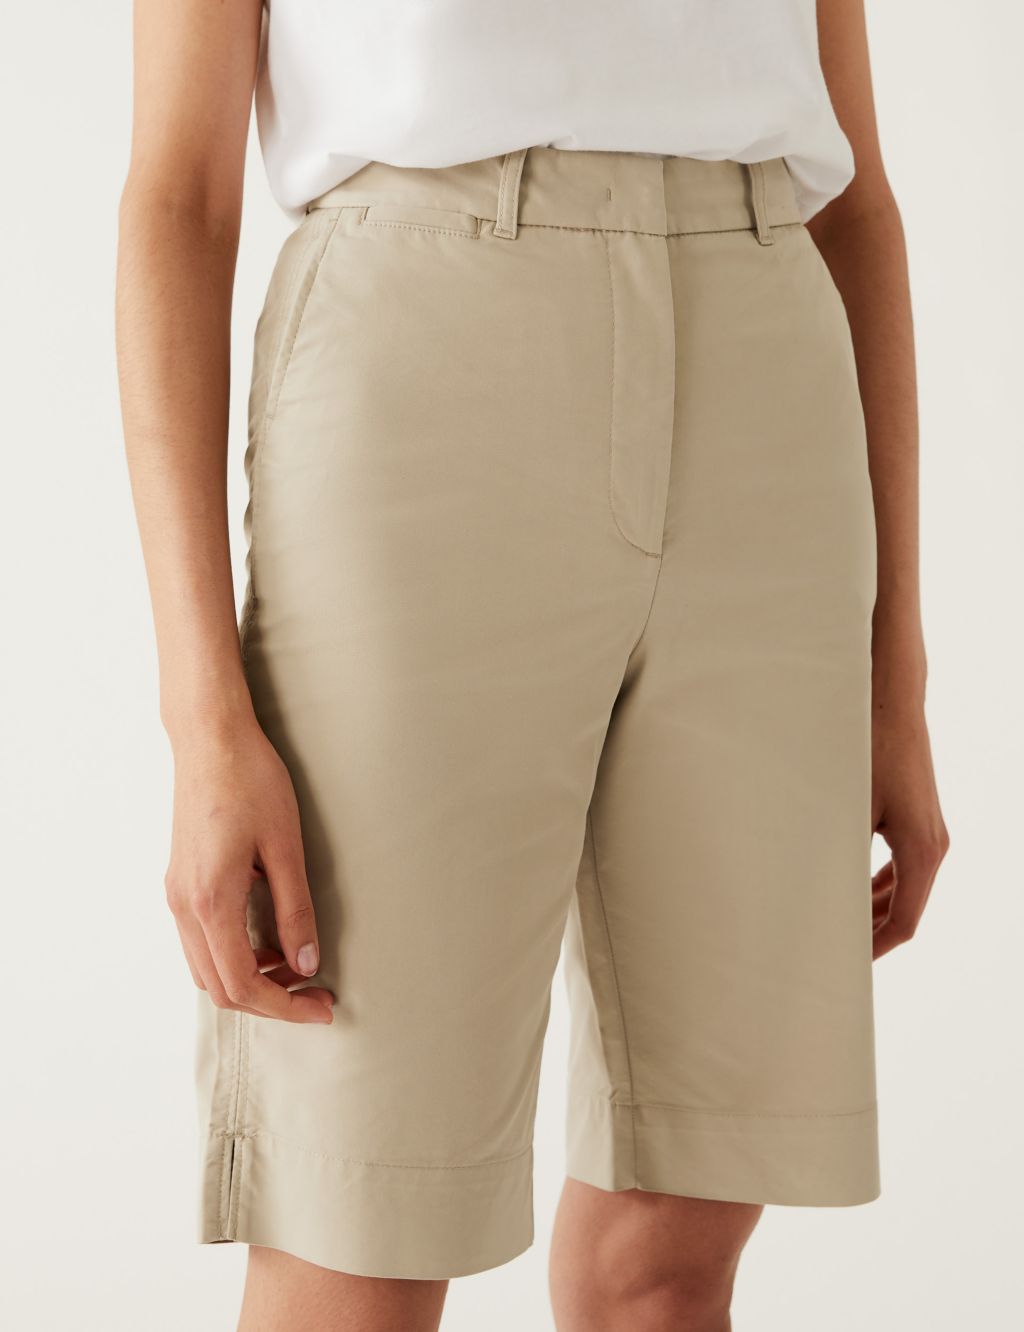 Cotton Rich Knee Length Chino Shorts image 2